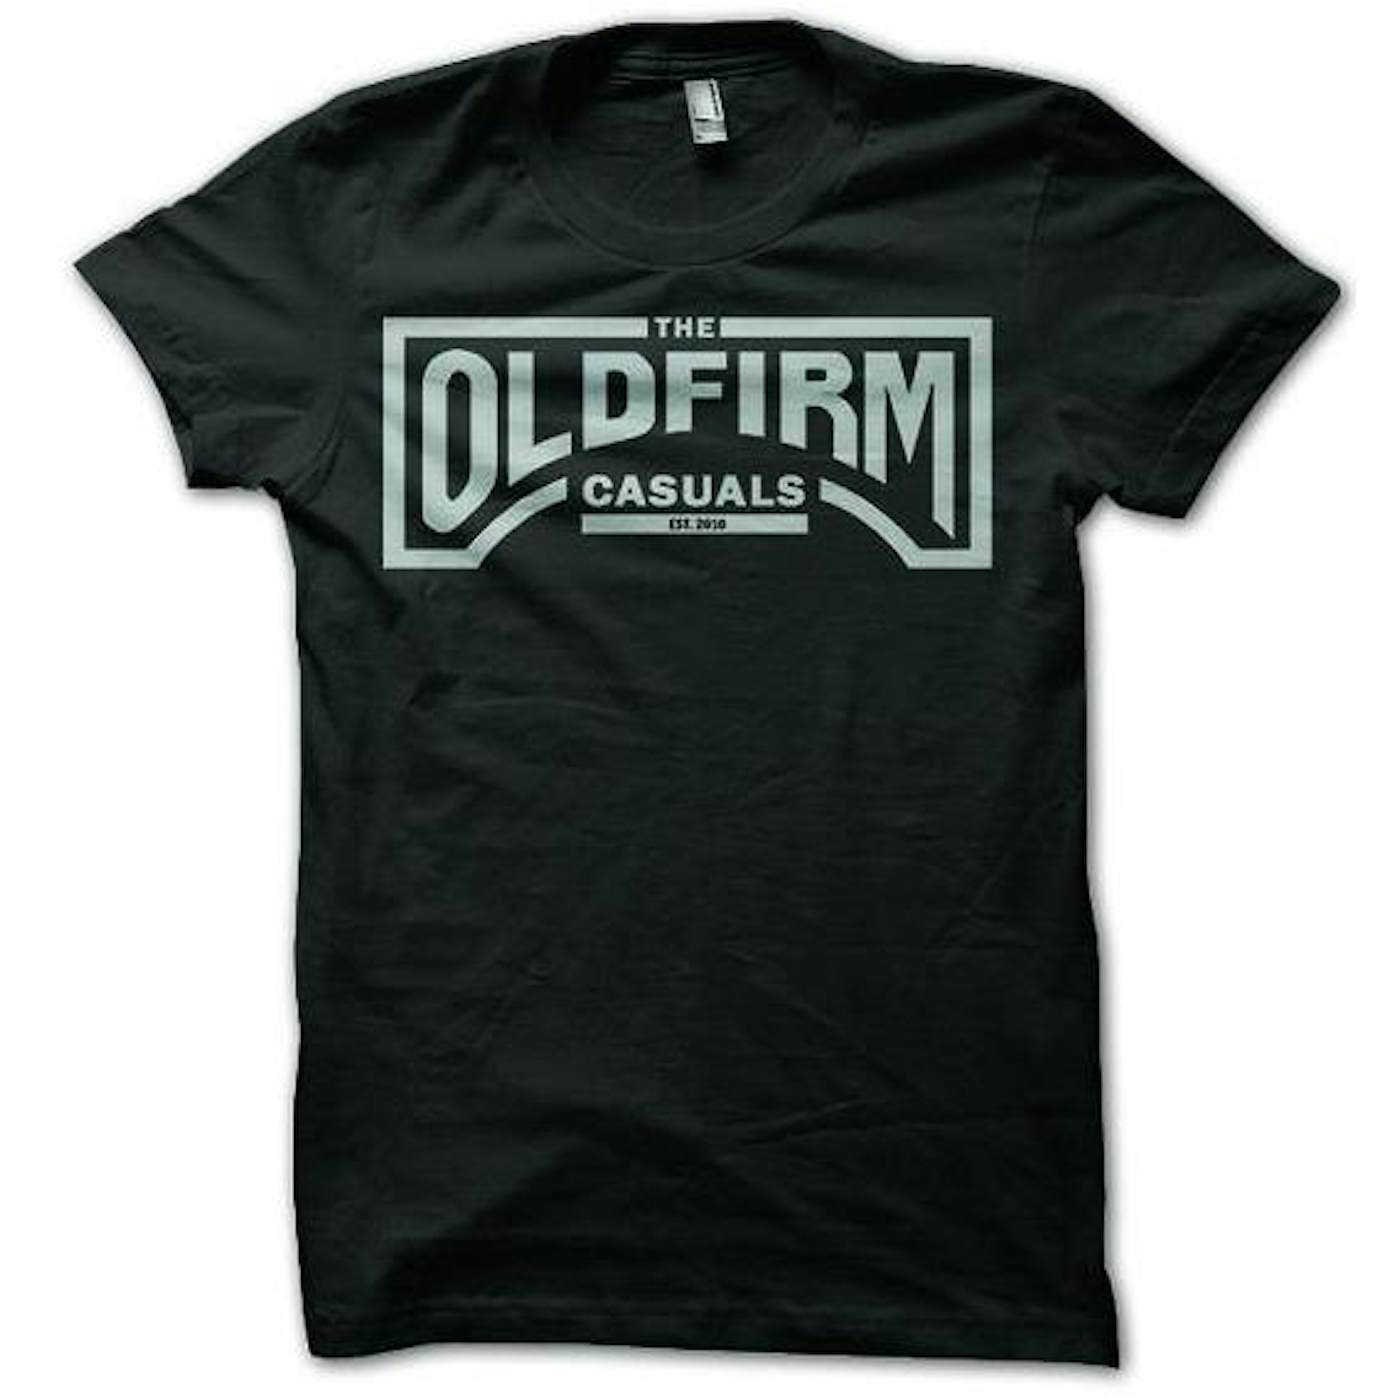 The Old Firm Casuals - Logo - Silver on Black - T-Shirt